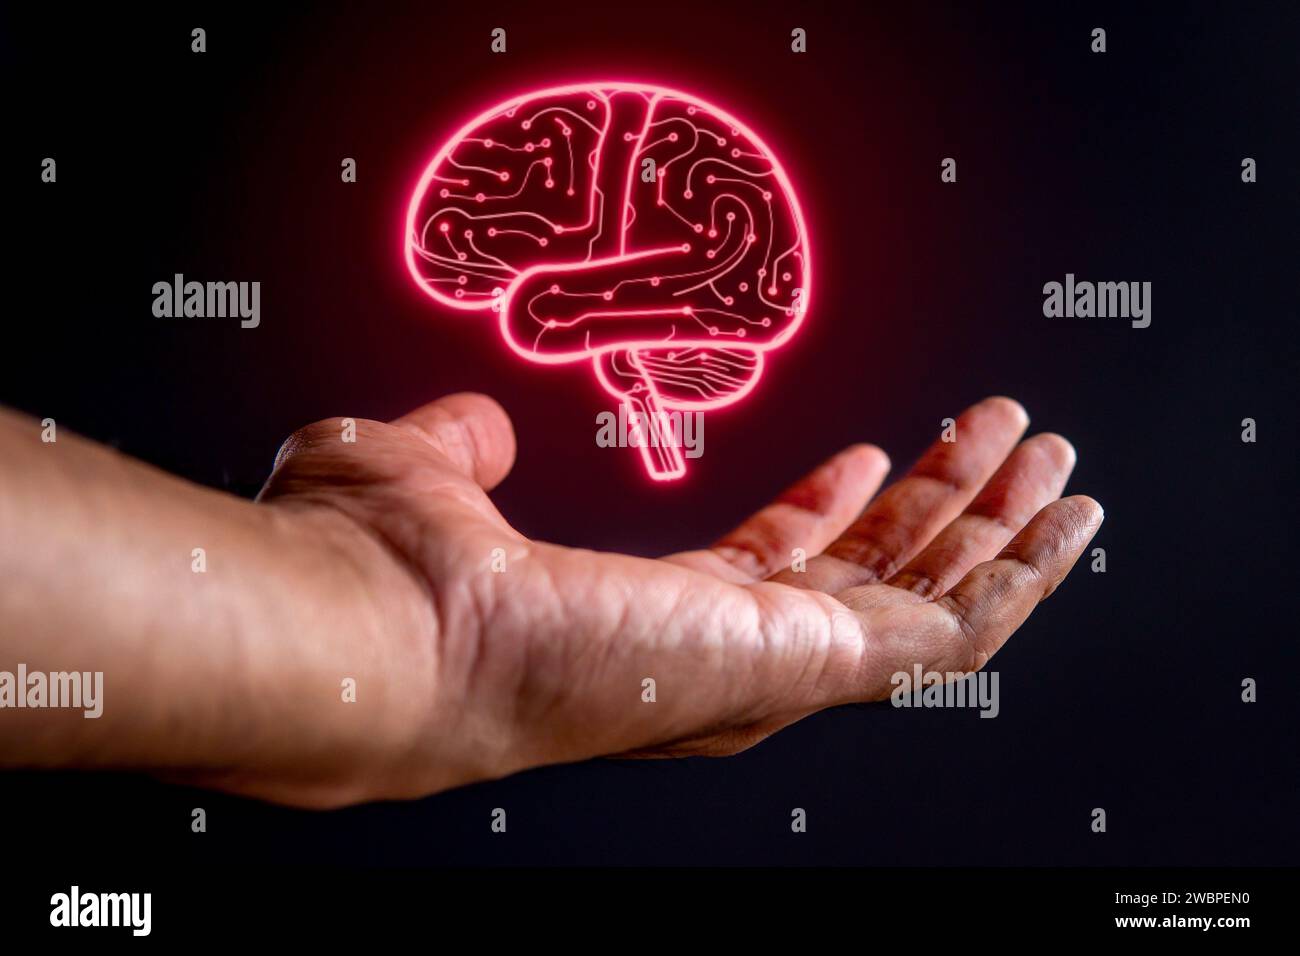 Hand and glowing brain shaped circuit board on black background. Artificial intelligence concept. Stock Photo